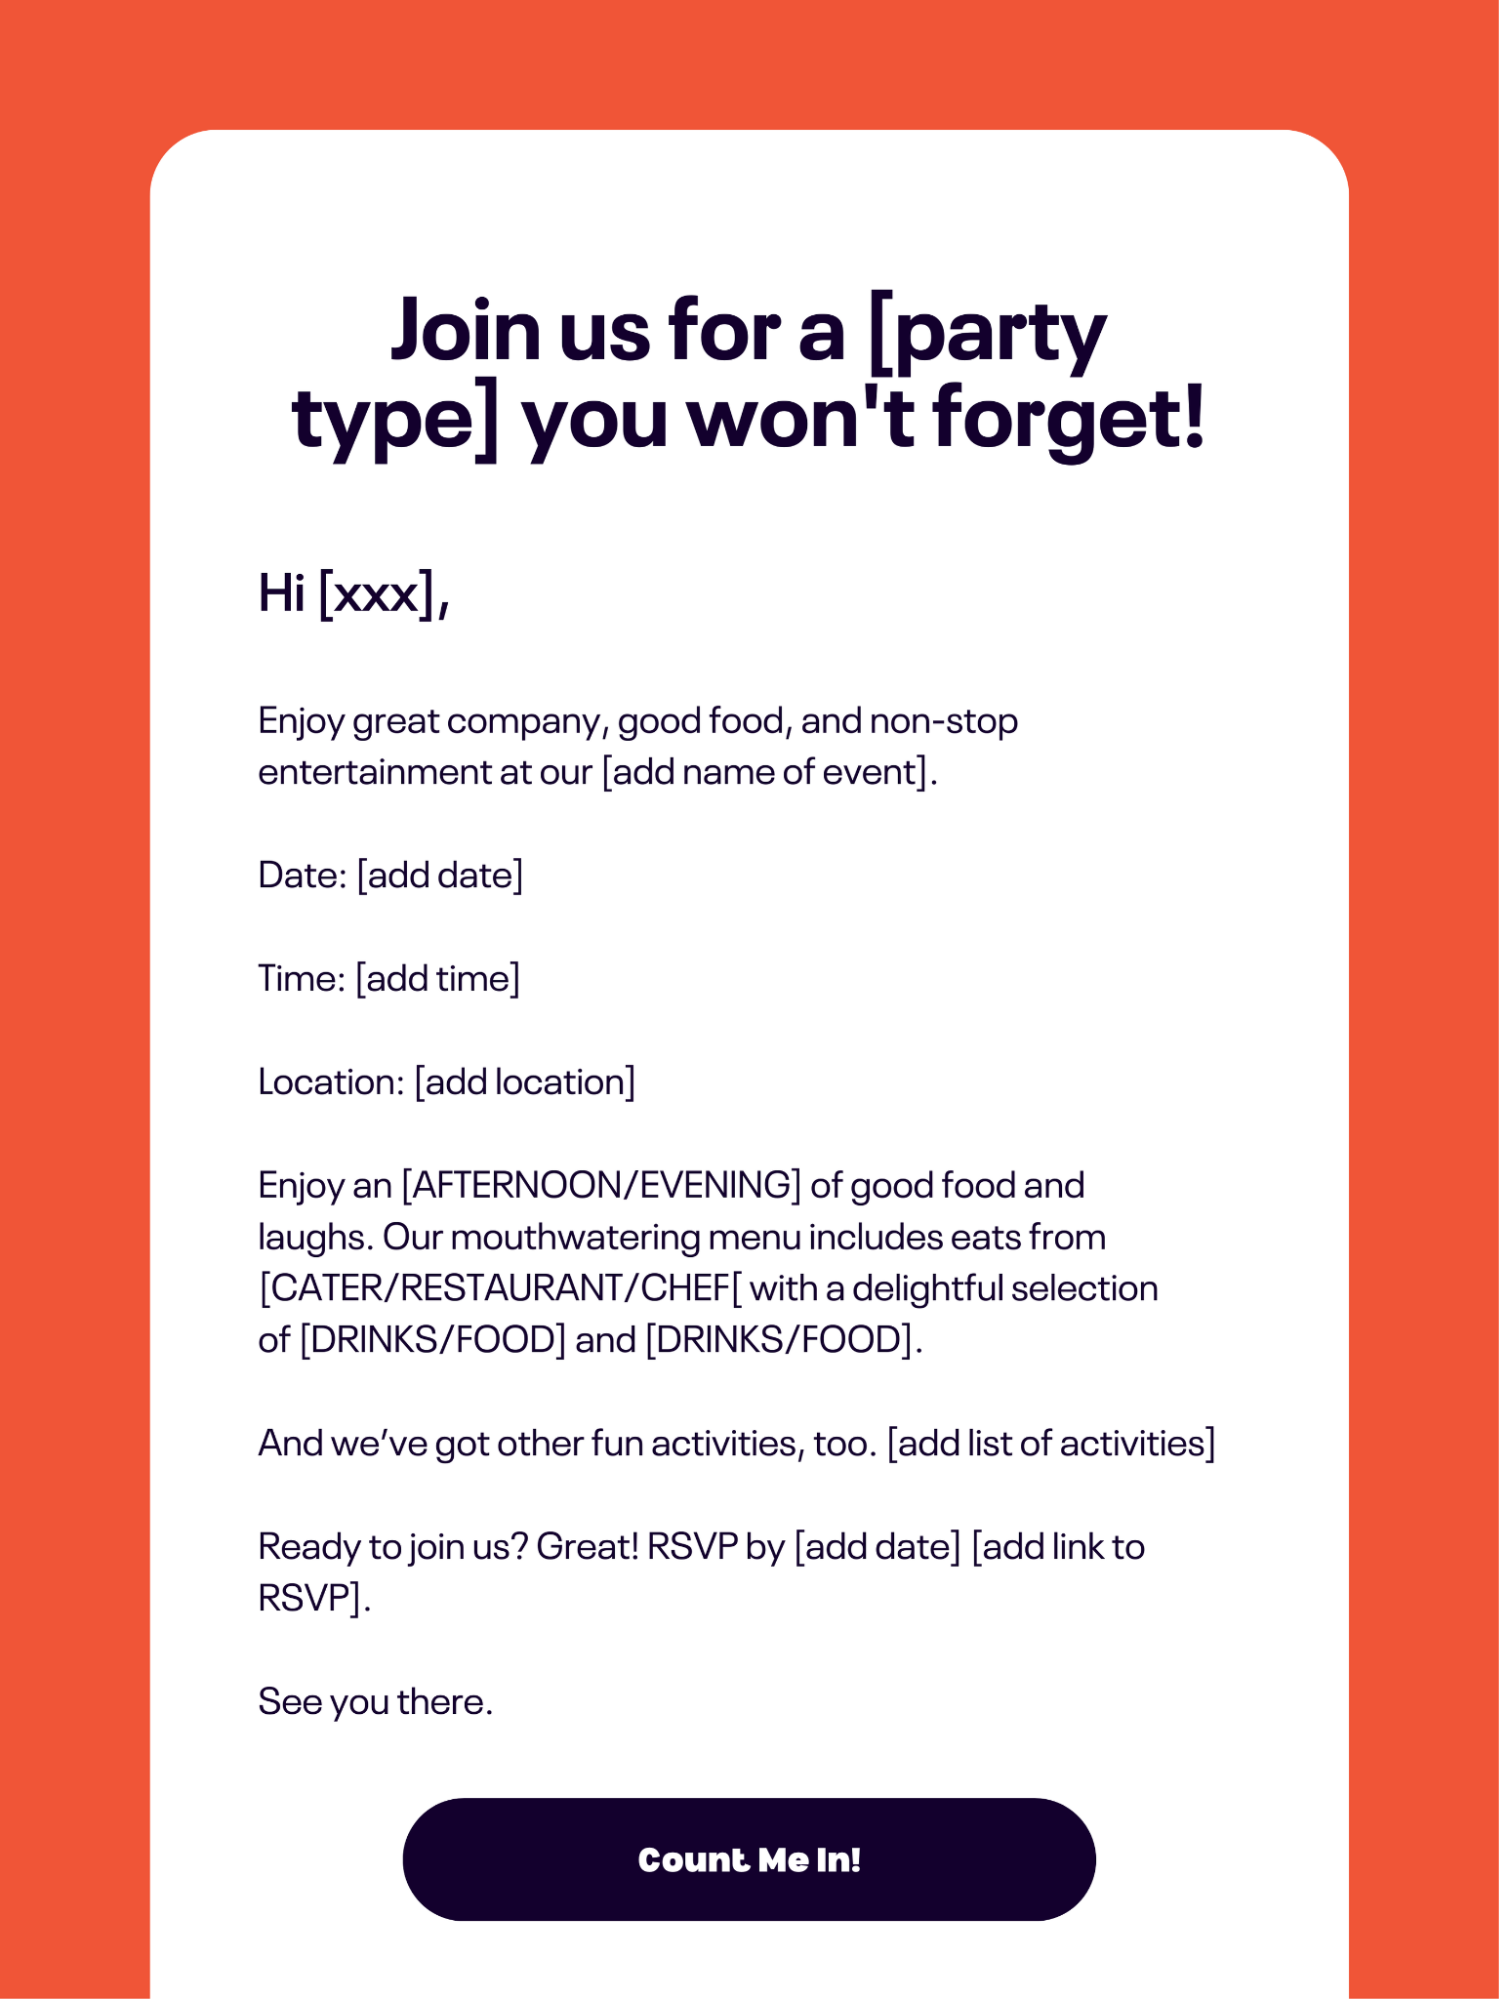 Template with party invitation email text